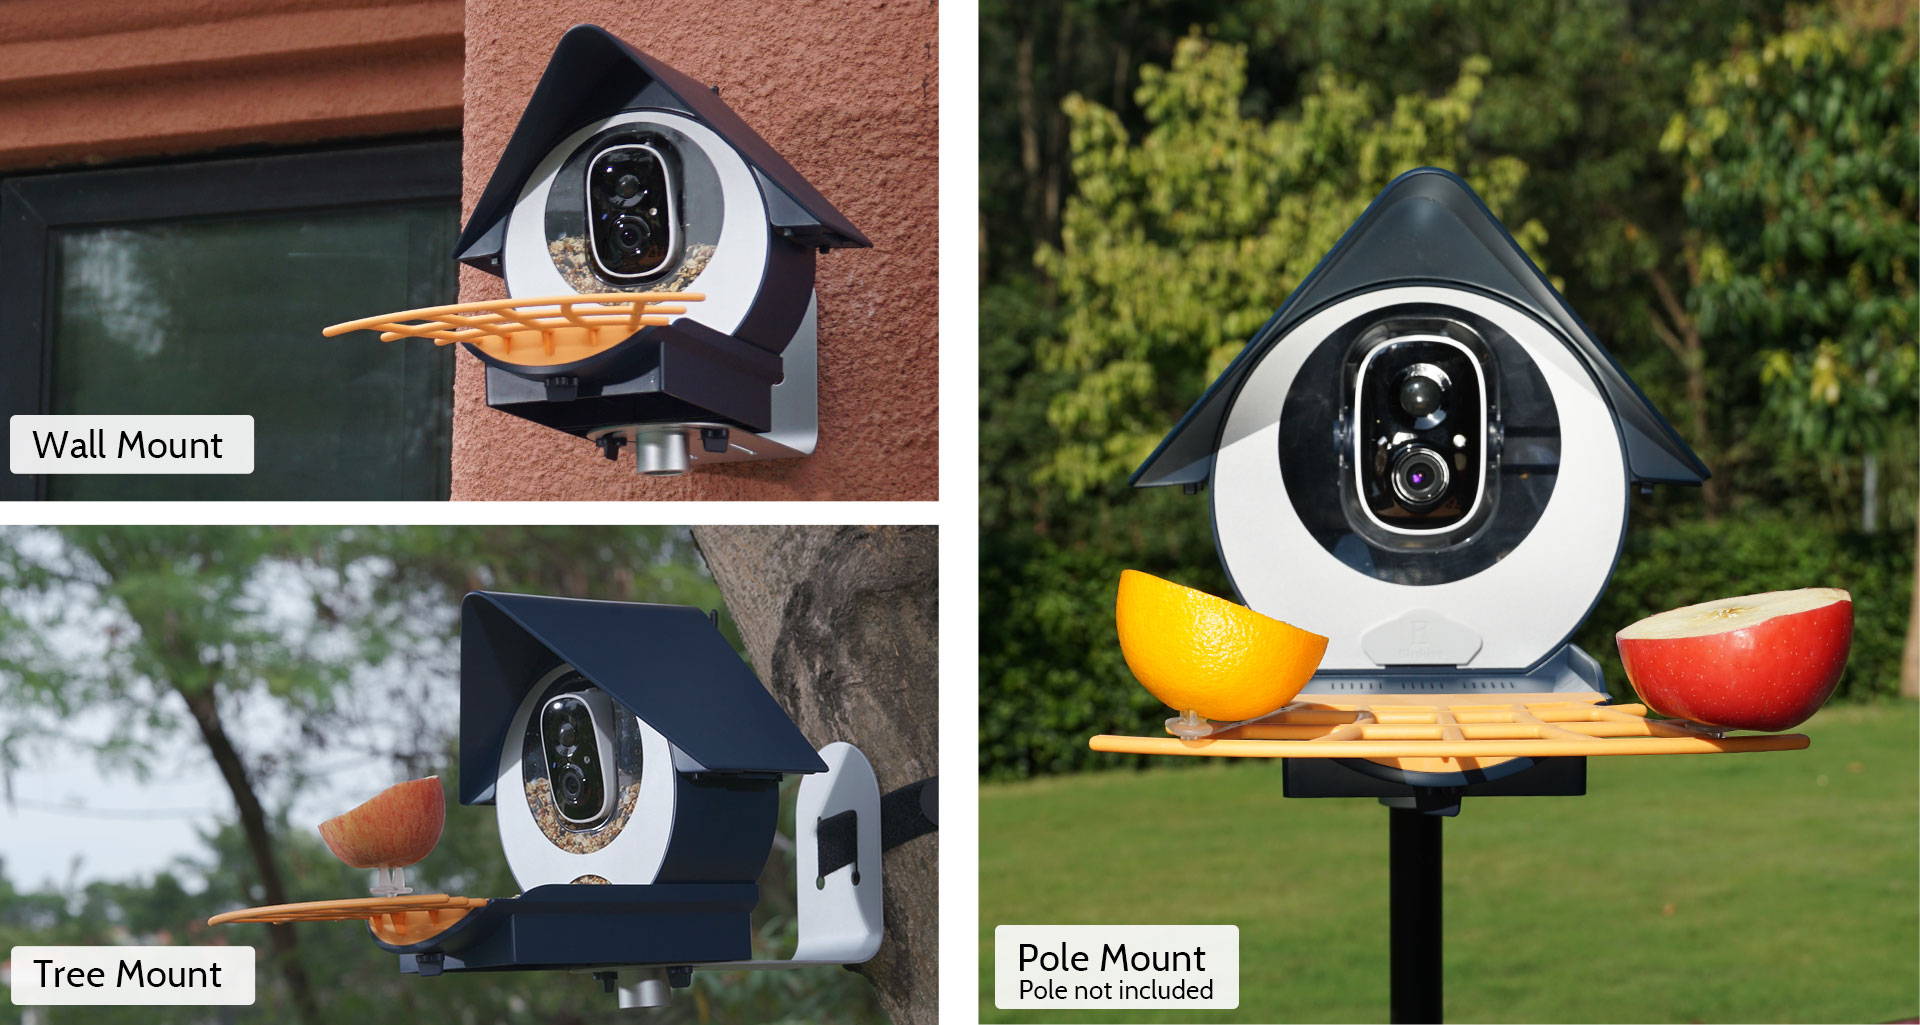 Birdkiss Smart Bird Feeders Installed on Wall, Tree, and Pole for Versatile Placement Options